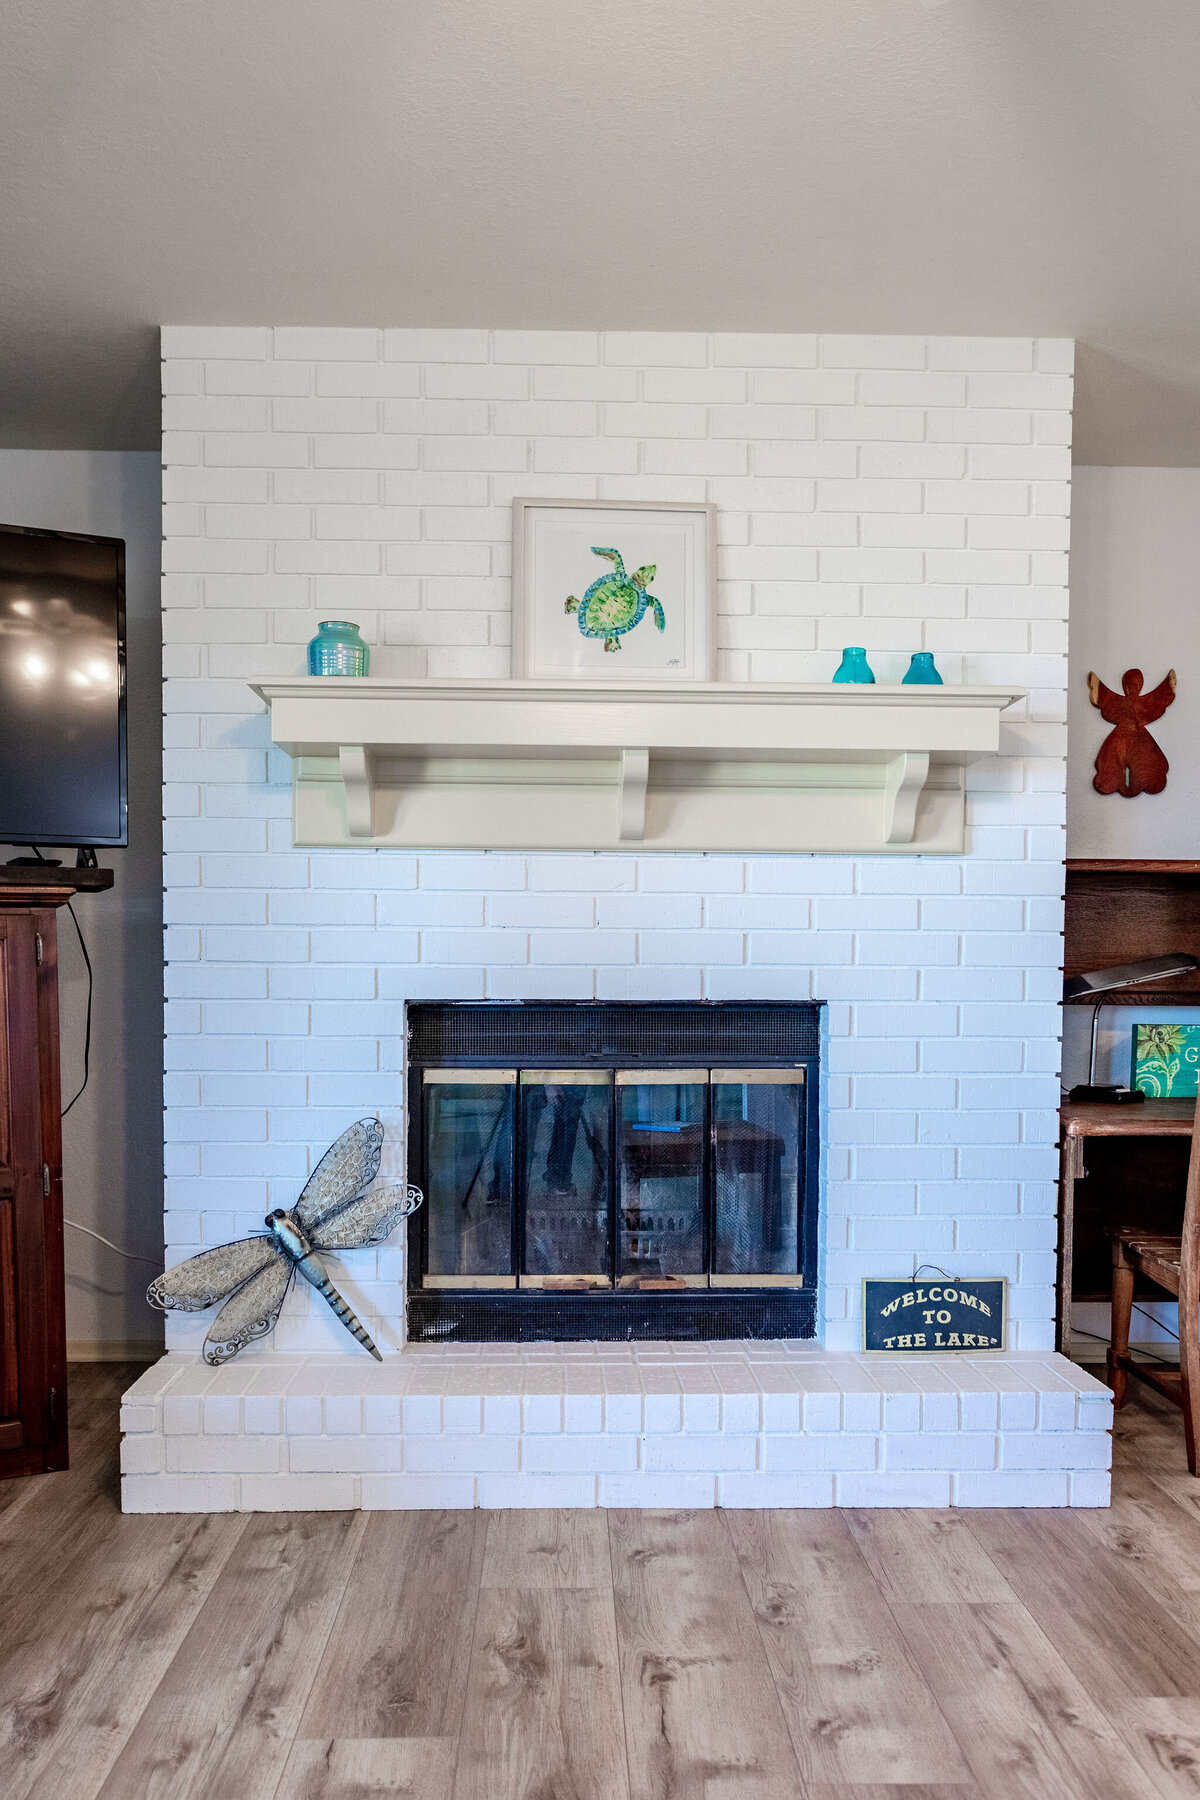 Fireplace area in the living room of this 2-bedroom, 2-bathroom lakeside vacation rental home for 6 guests on Tradinghouse Lake with privacy access to a fishing dock and boat launch pad, ping pong table, gazebo, free wifi and free parking in Waco, TX.